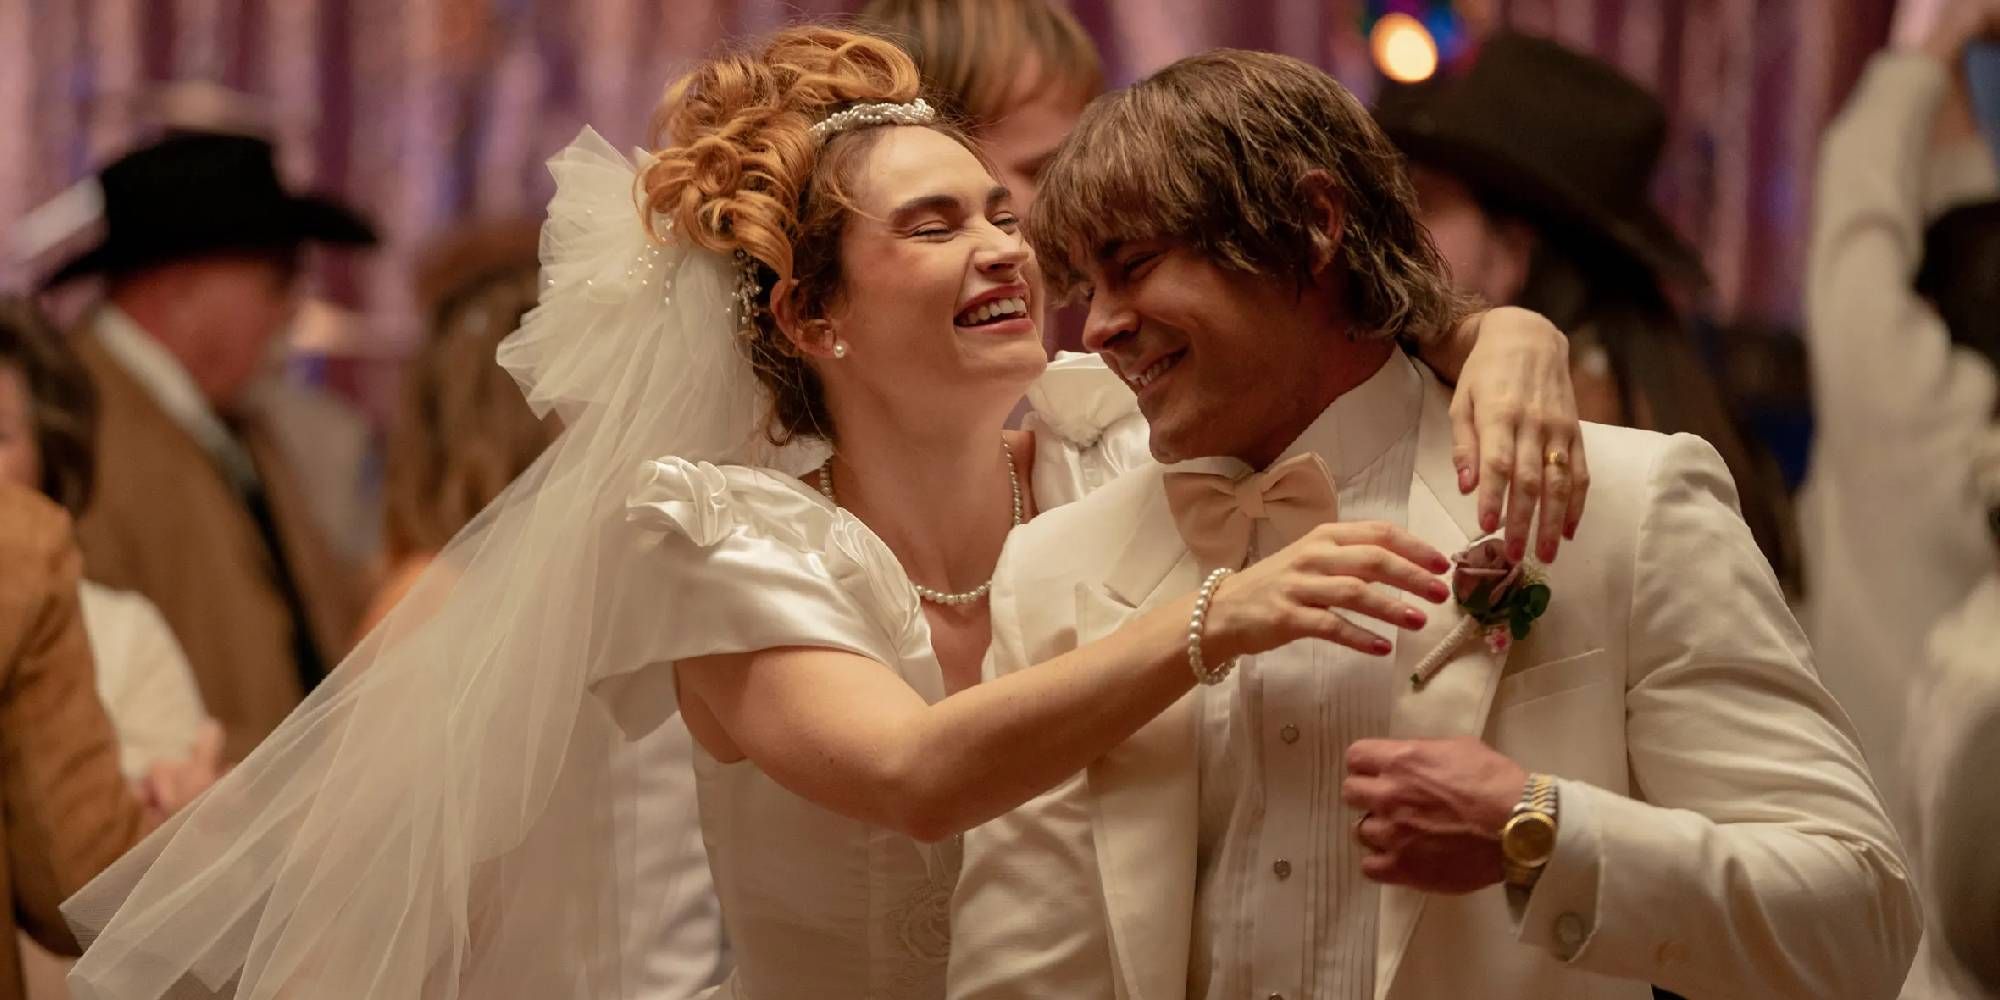 Lily James as Pam Adkisson in a wedding gown holding Zac Efron as Kevin Von Erich and laughing in The Iron Claw